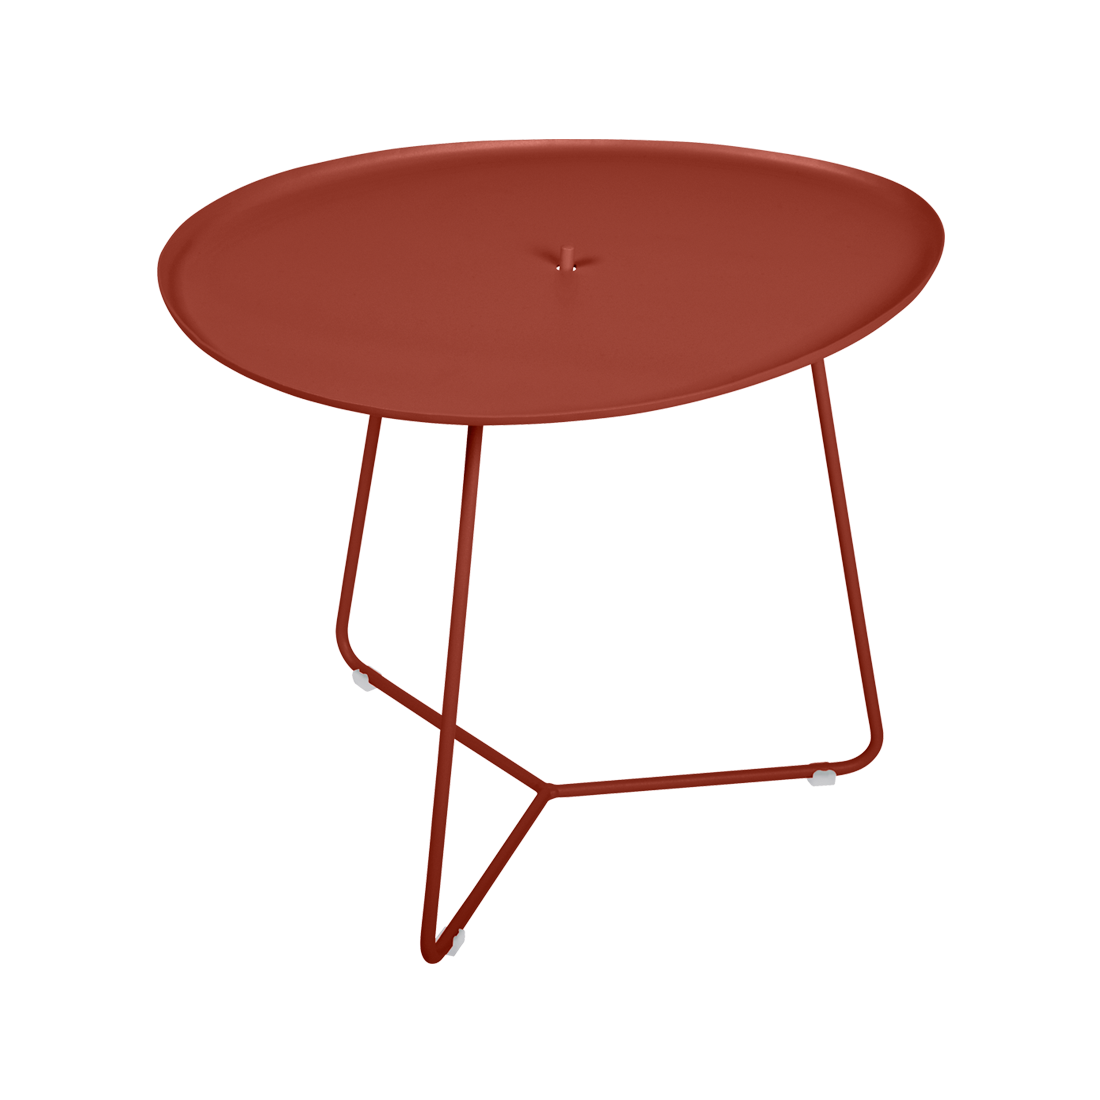 Table basse cocotte ocre rouge